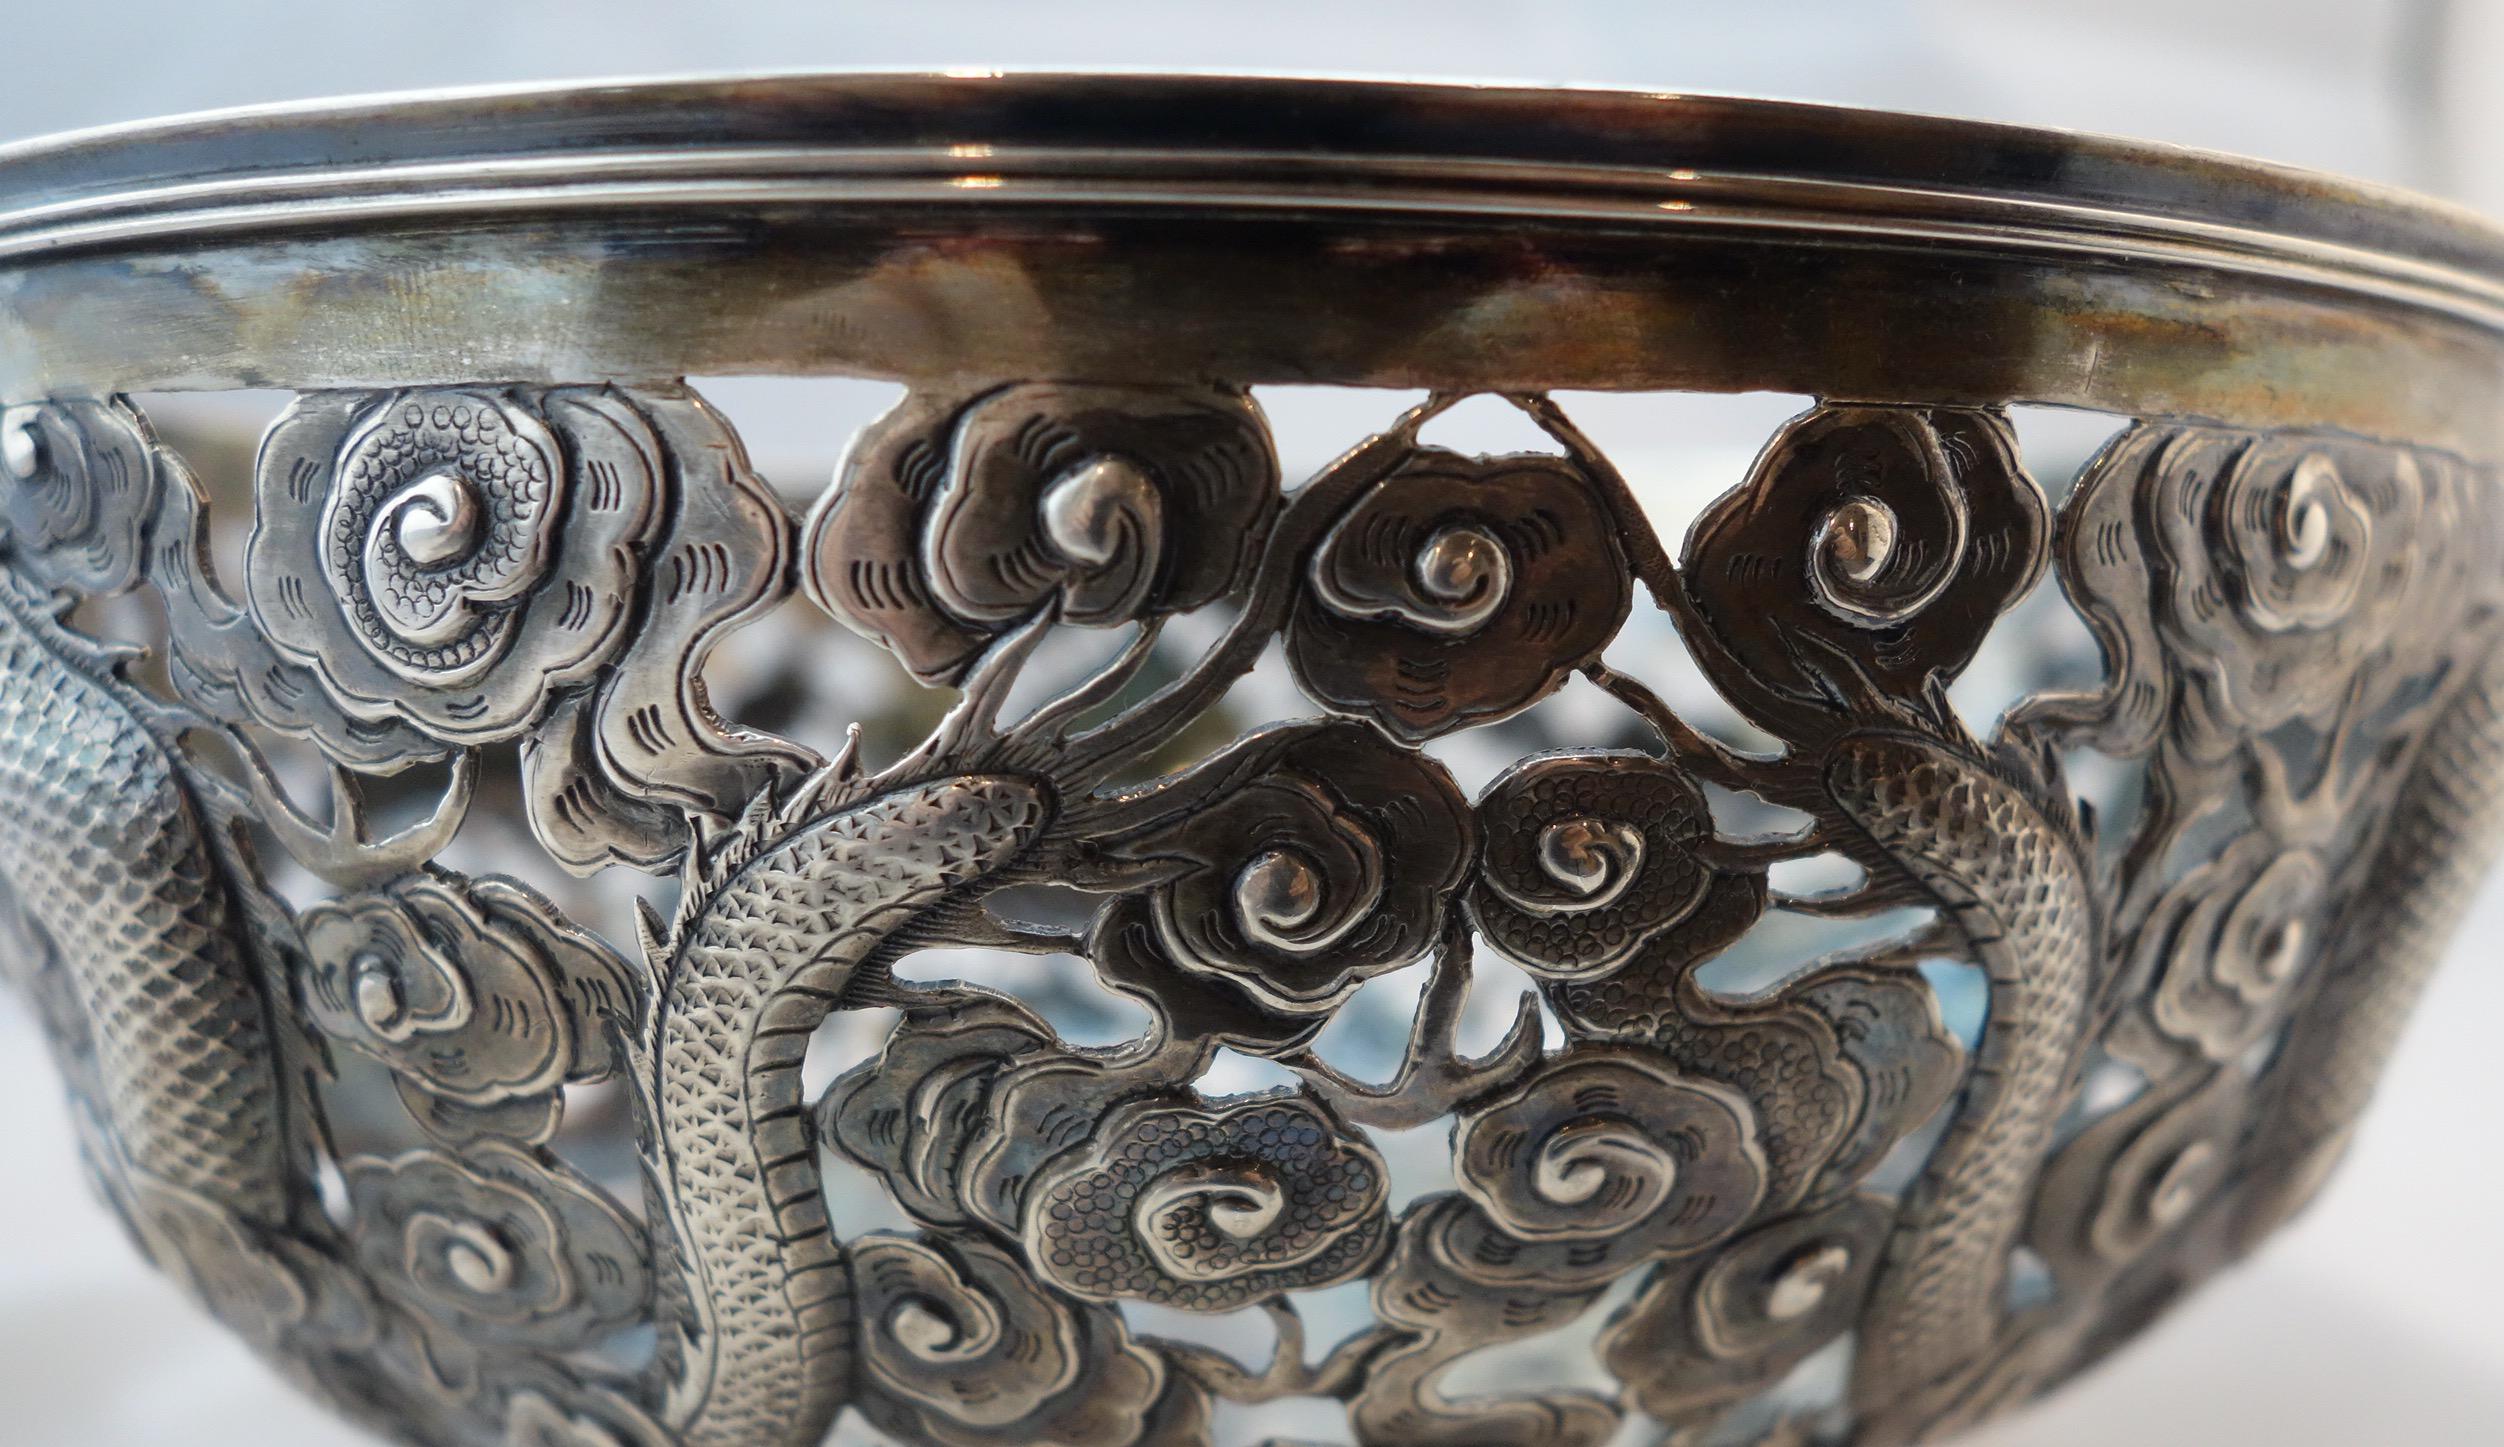 Chinese Export Silver Openwork Dragon Bowl by Wang Hing & Co, Hong Kong, 1890 In Good Condition For Sale In Gainesville, FL